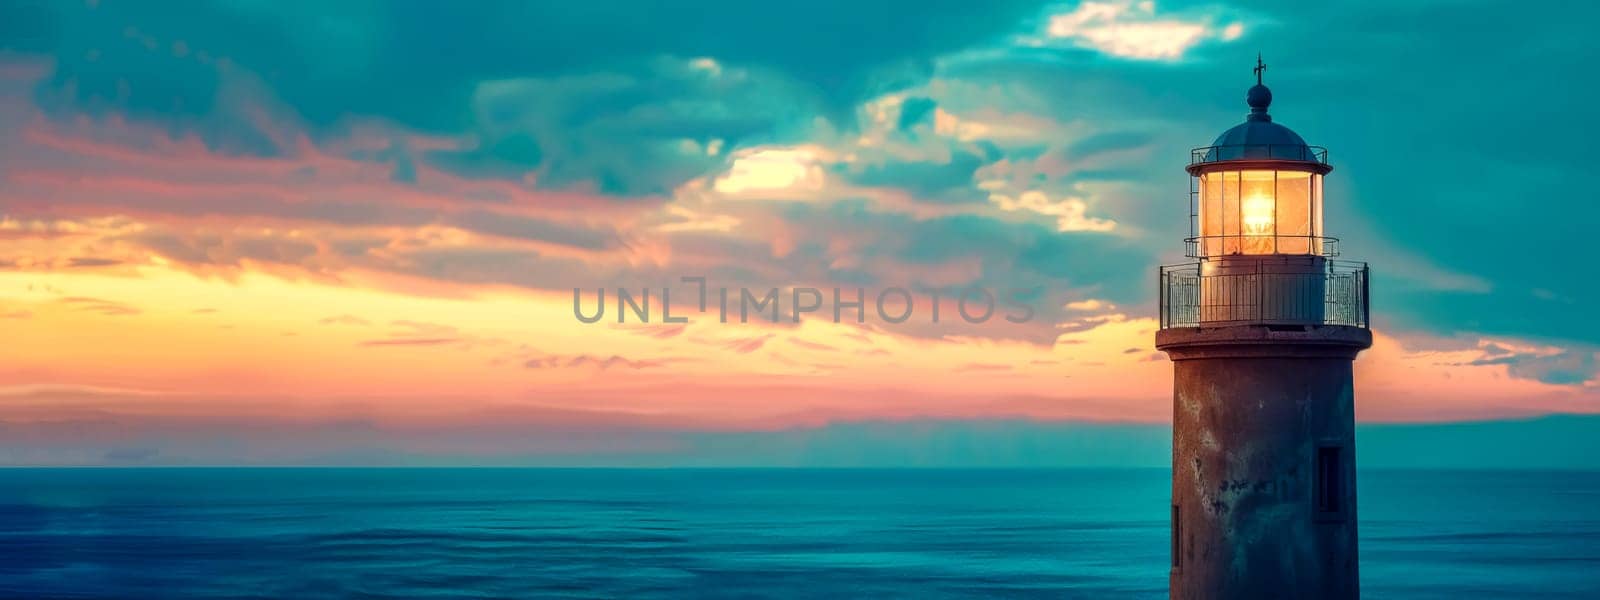 Panoramic view of a lighthouse against a vibrant sunset over the ocean